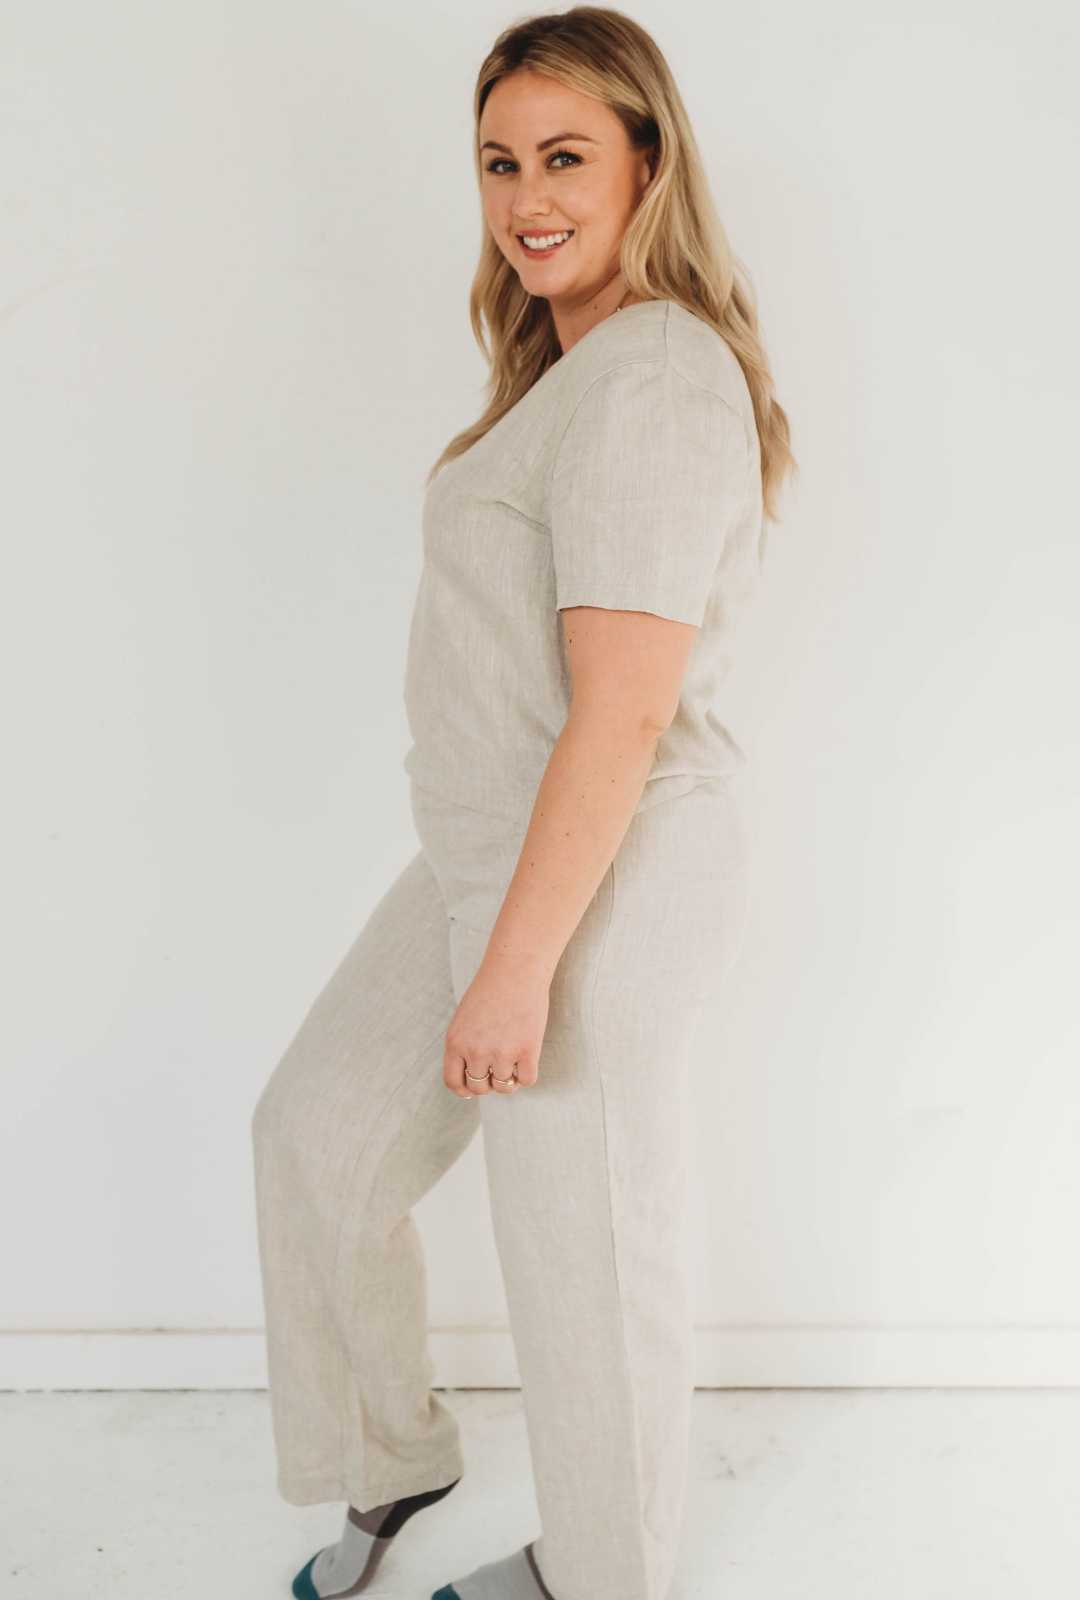 linen top and pants